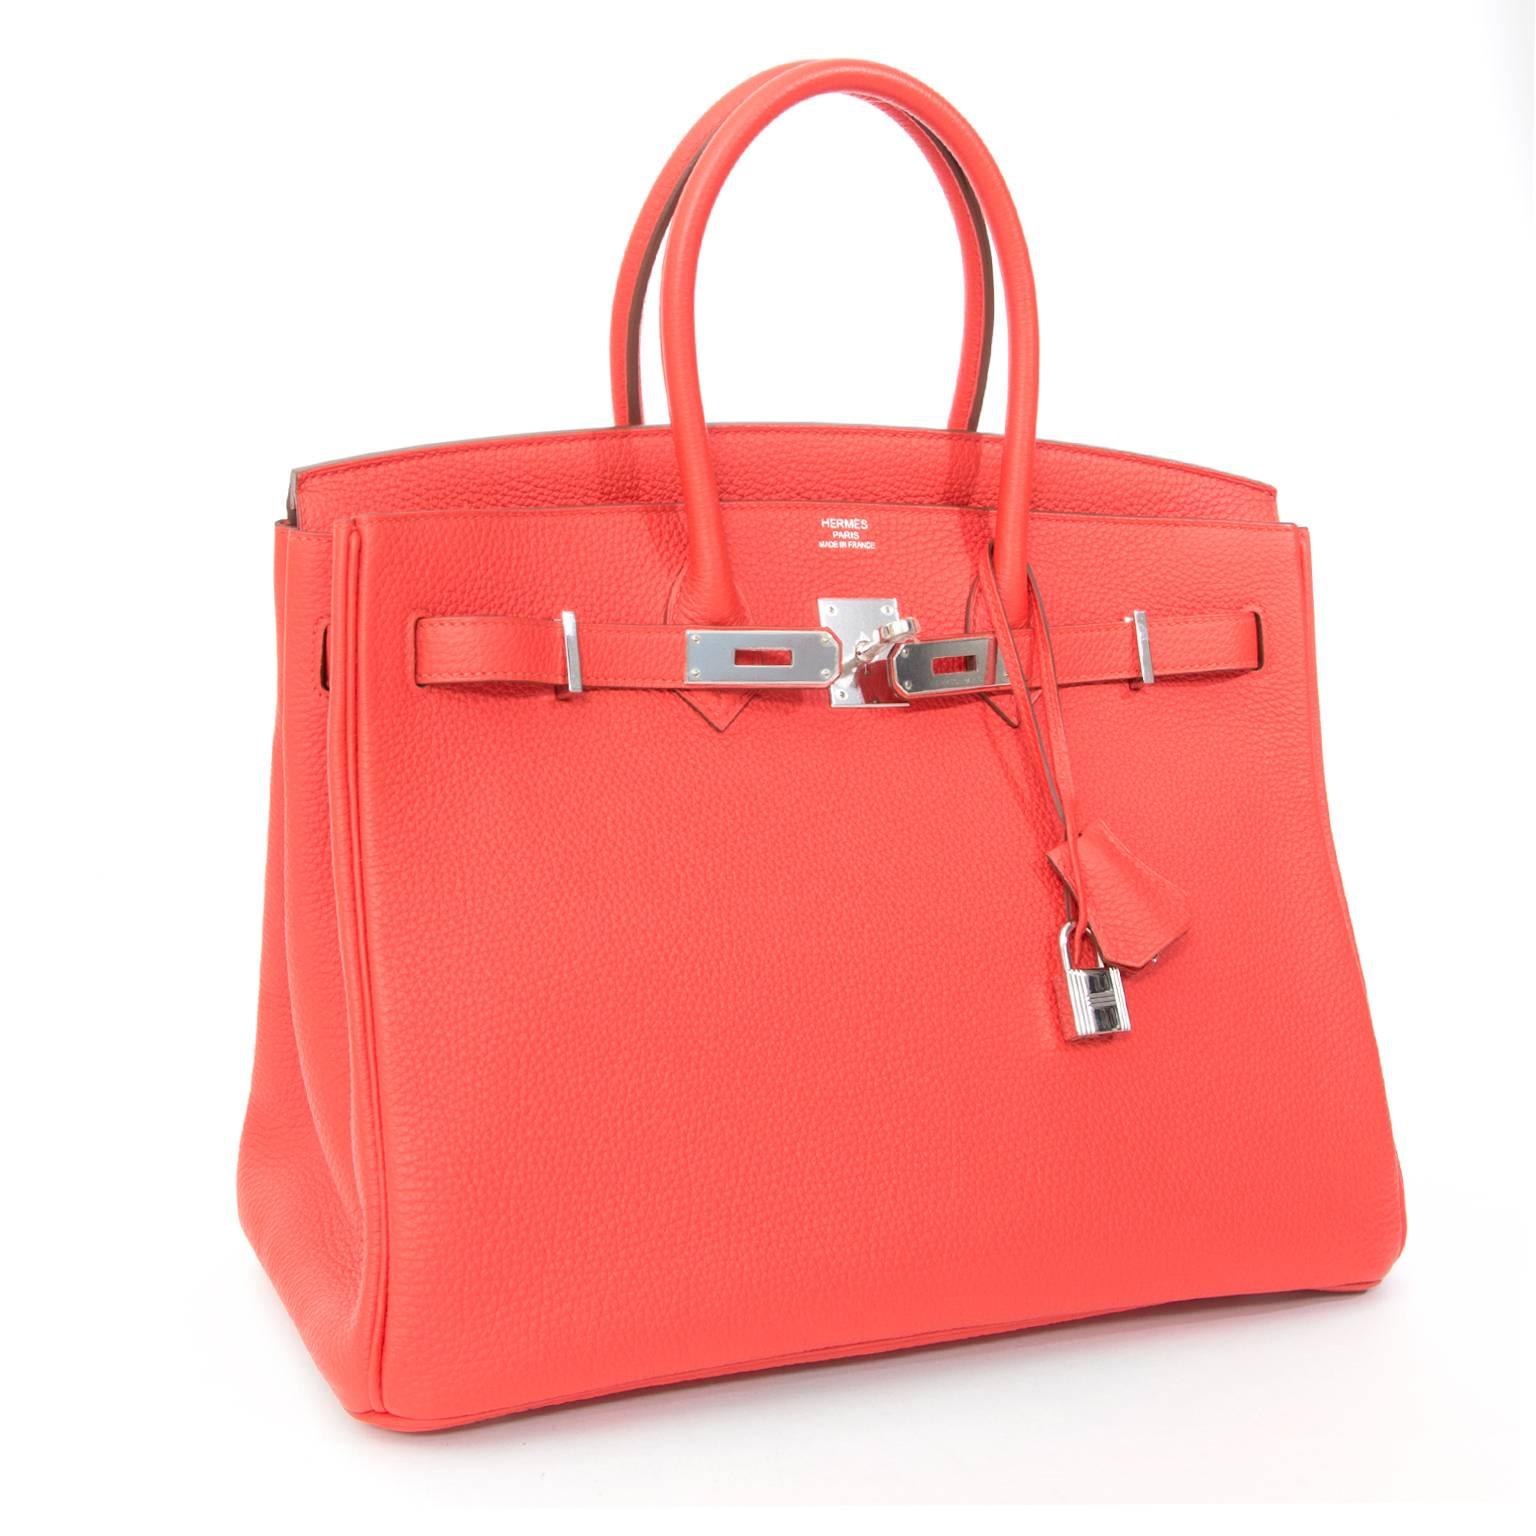 This is a brand new, storebought and never worn Hermès Birkin bag handcrafted from their famous luxurious Togo calfskin. Its color is called Rouge Capucine, referring to the vibrant orange-red color of the the Capucine flower's petals. There's a